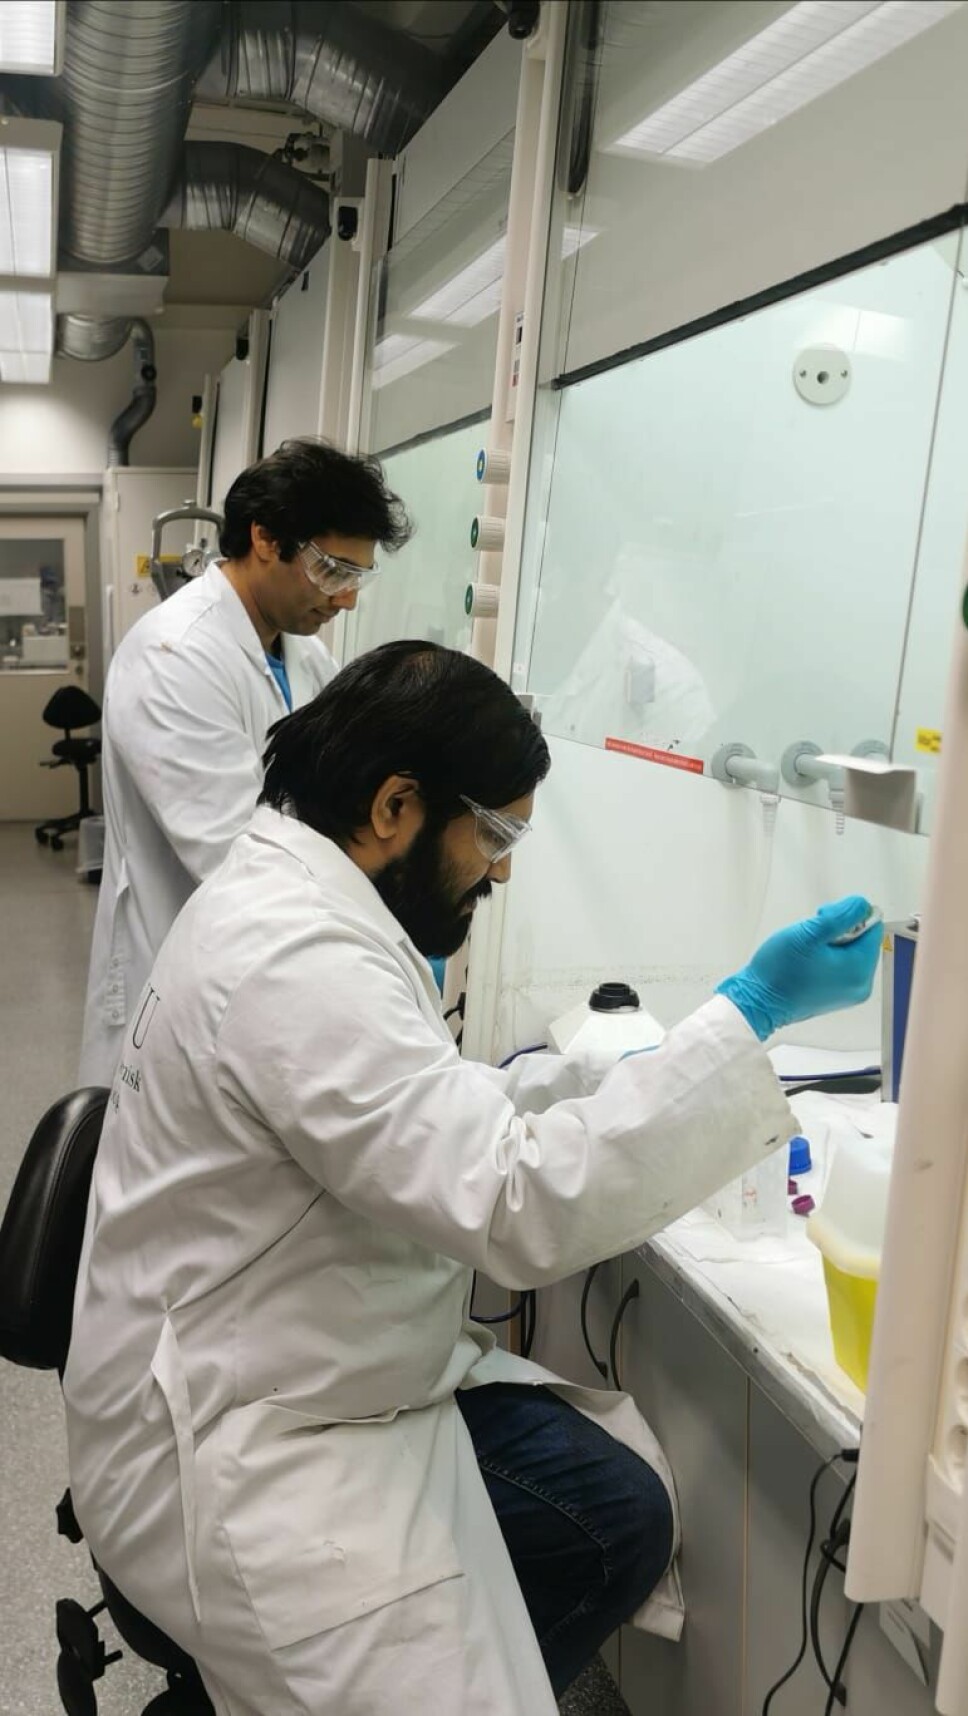 Anuvansh Sharma from the Department of Materials Science and Engineering and Sulalit Bandyopadhyay from the Department of Chemical Engineering in the lab. They and colleague Vegar Ottesen developed the magnetic particles for the test.